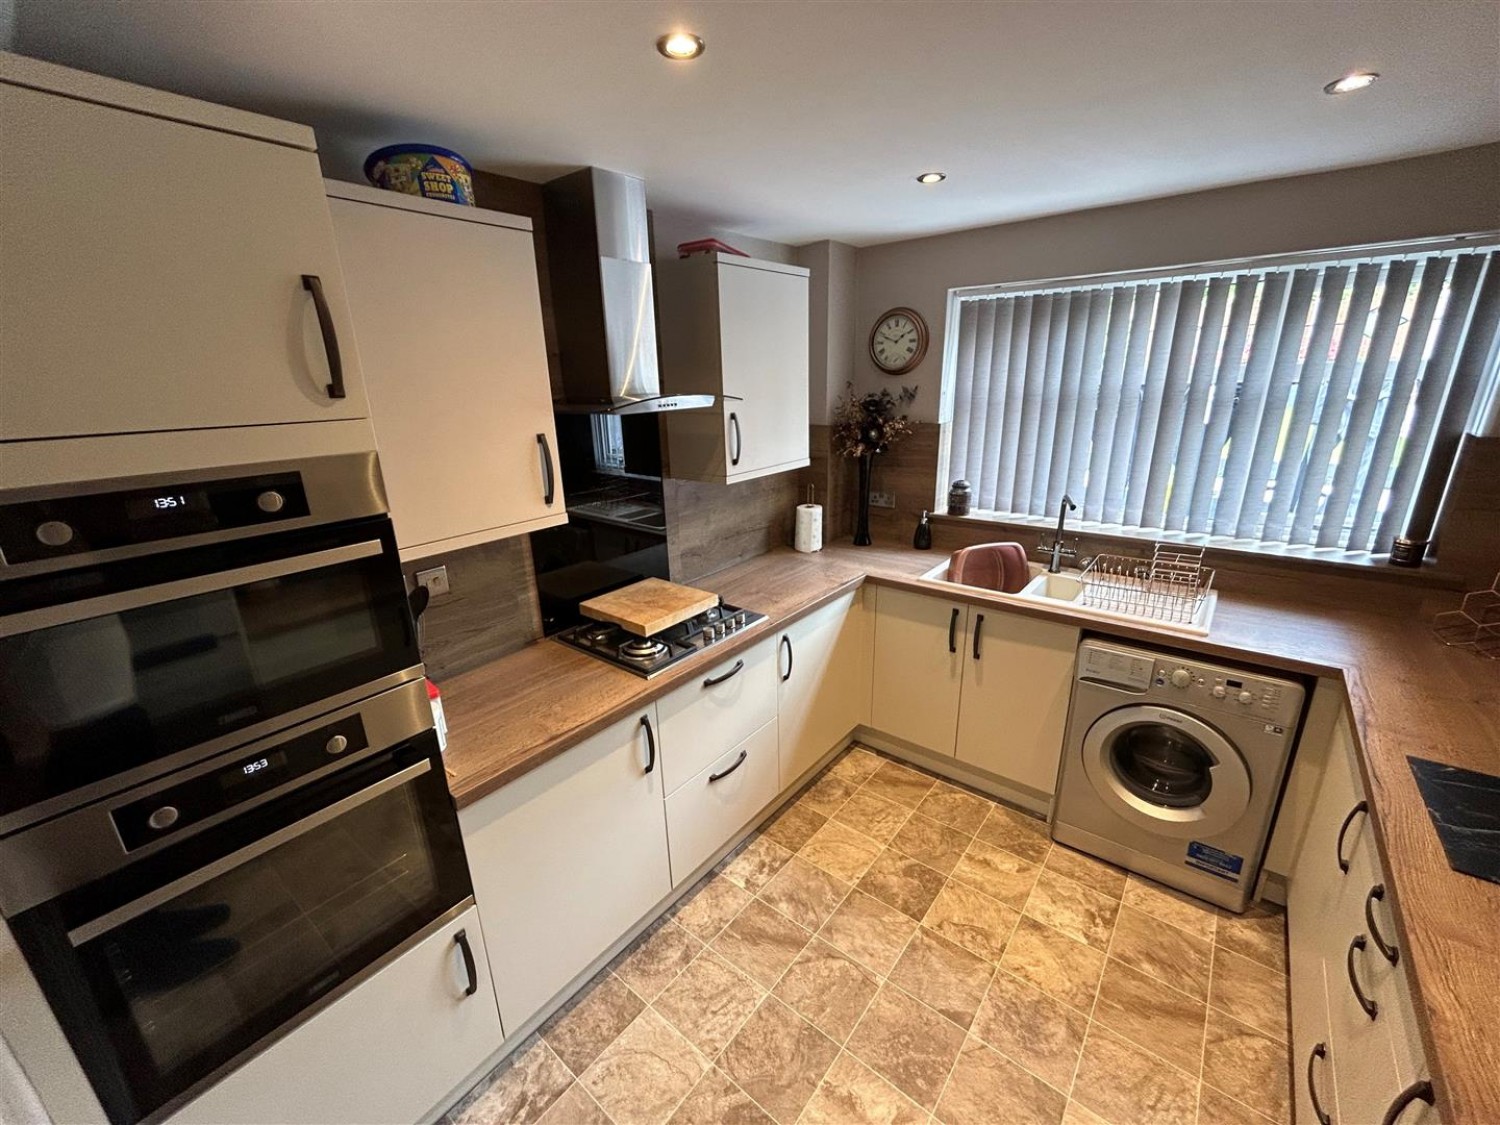 Aldeford Drive, Withymoor, Brierley Hill, DY5 4RB